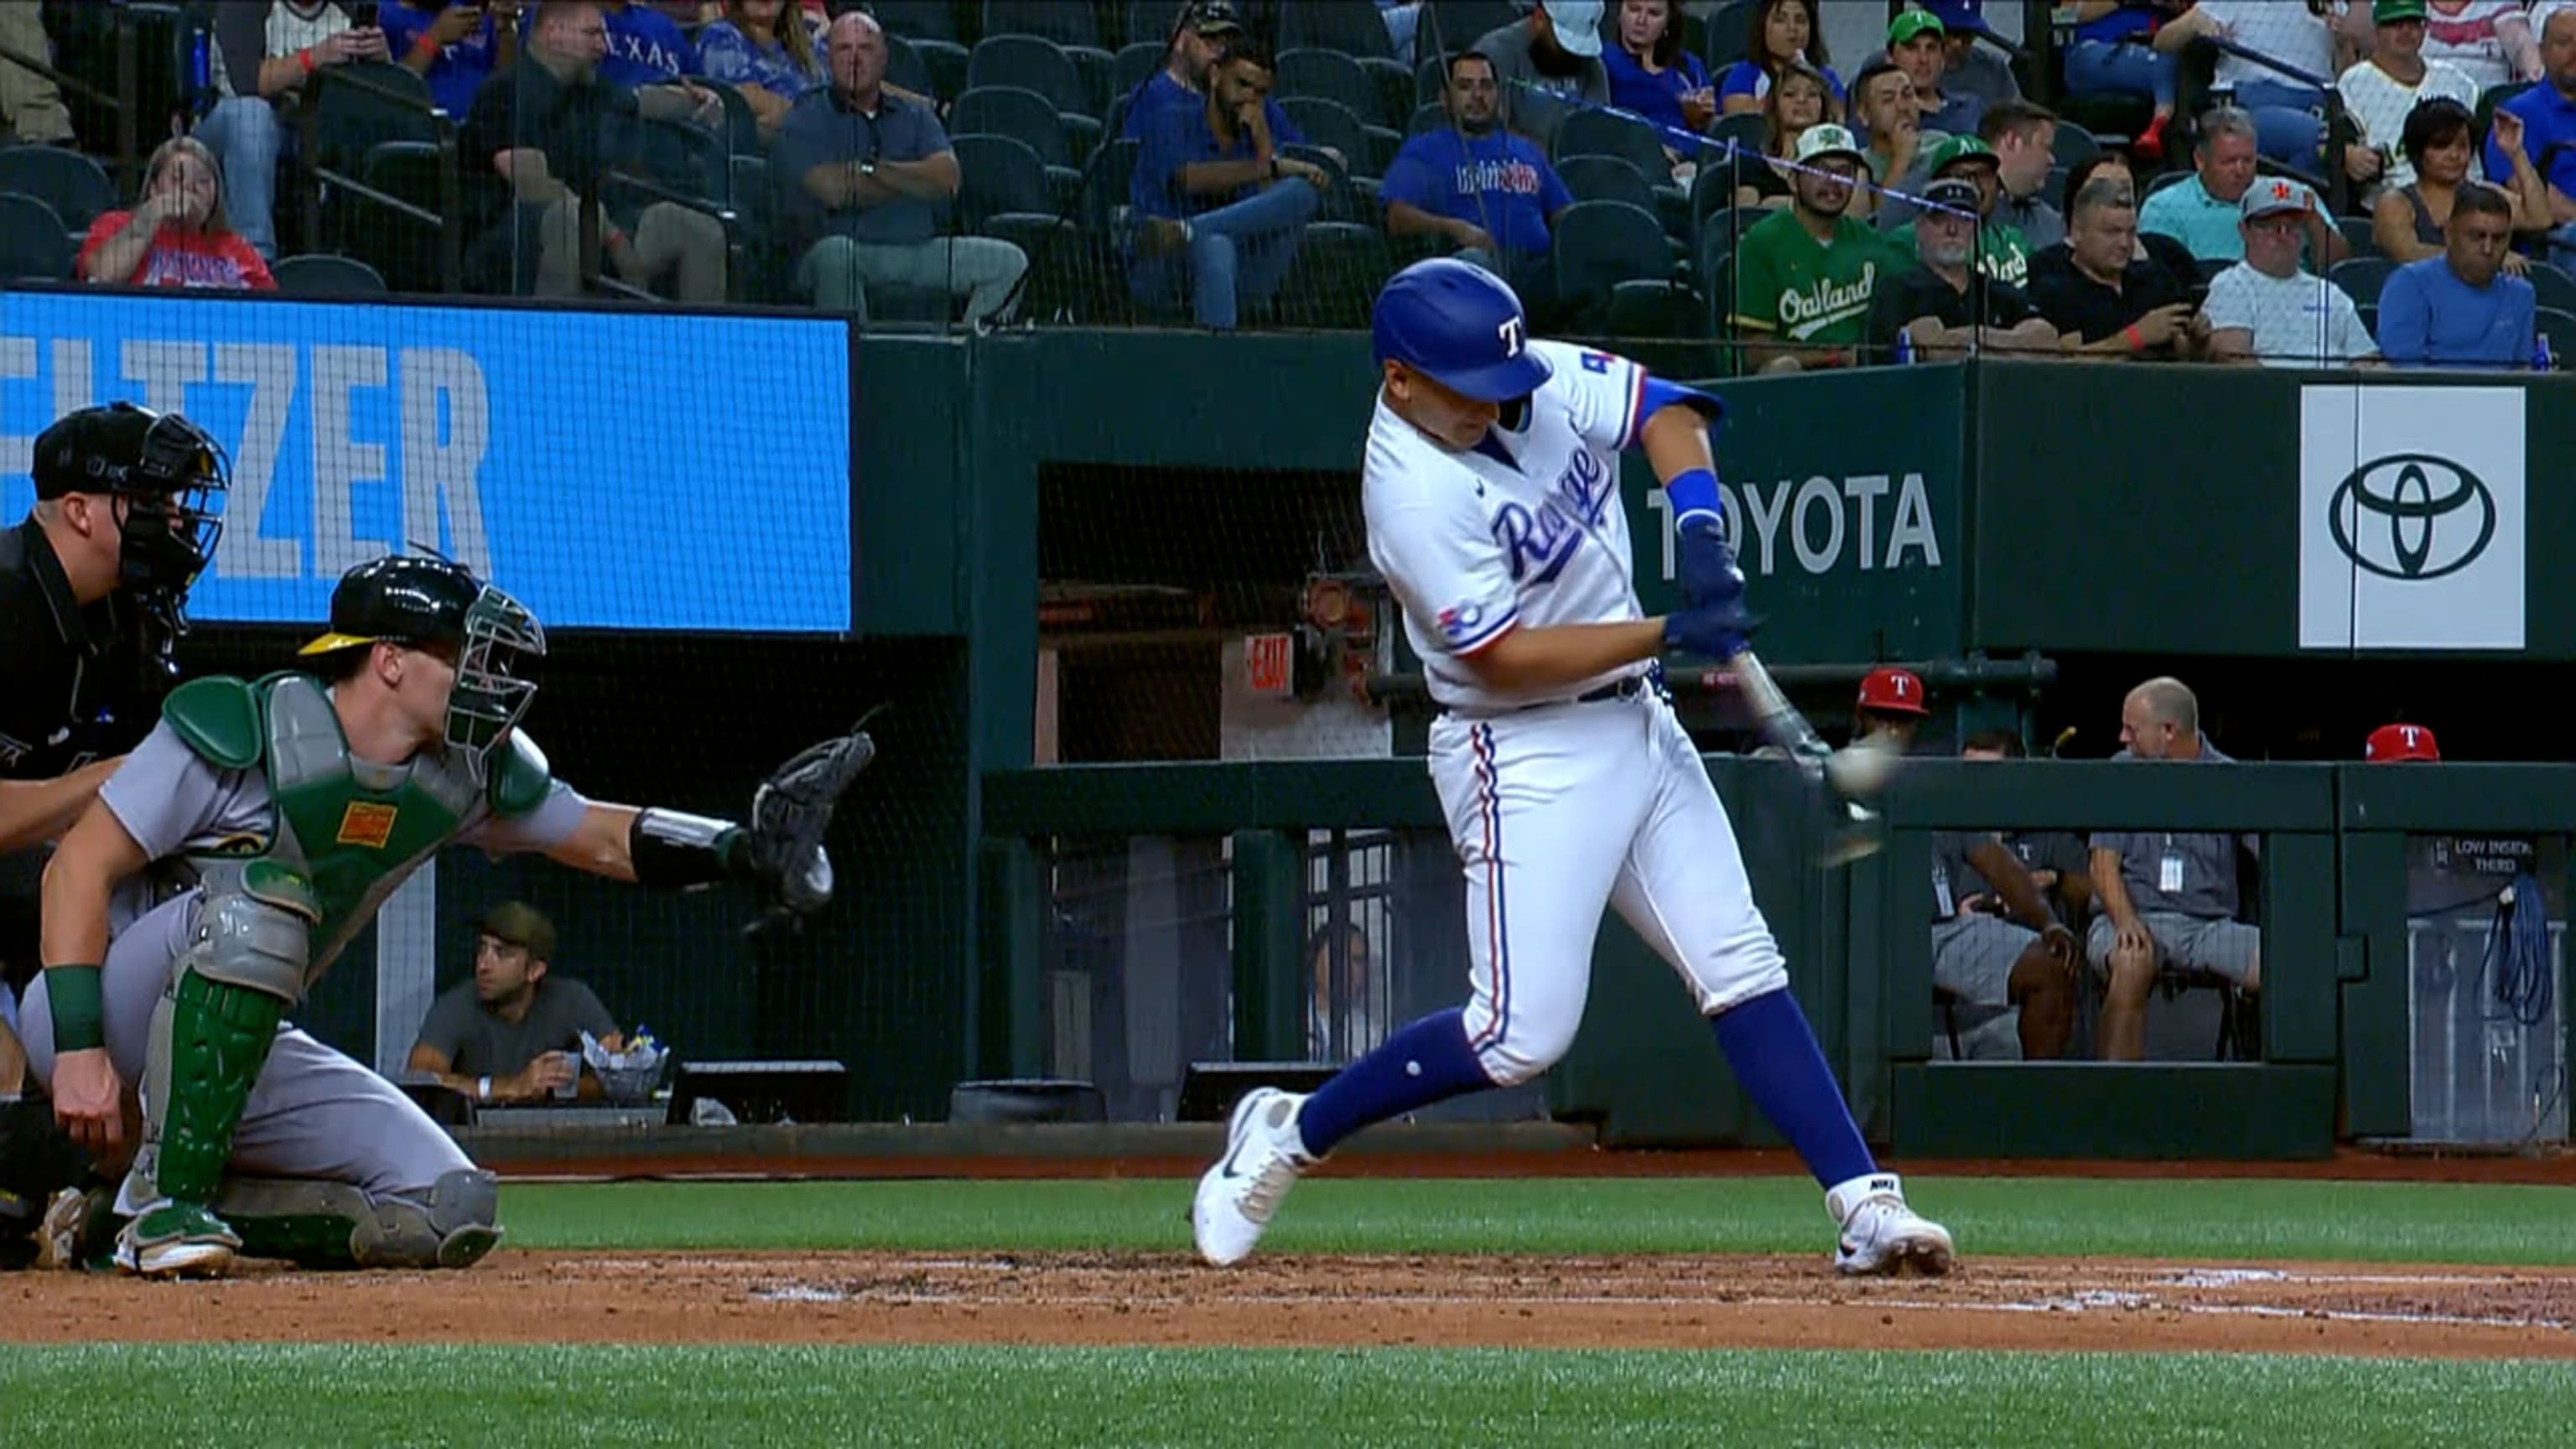 Rangers edge Mets in 9th, 2nd win in 11 games – NBC 5 Dallas-Fort